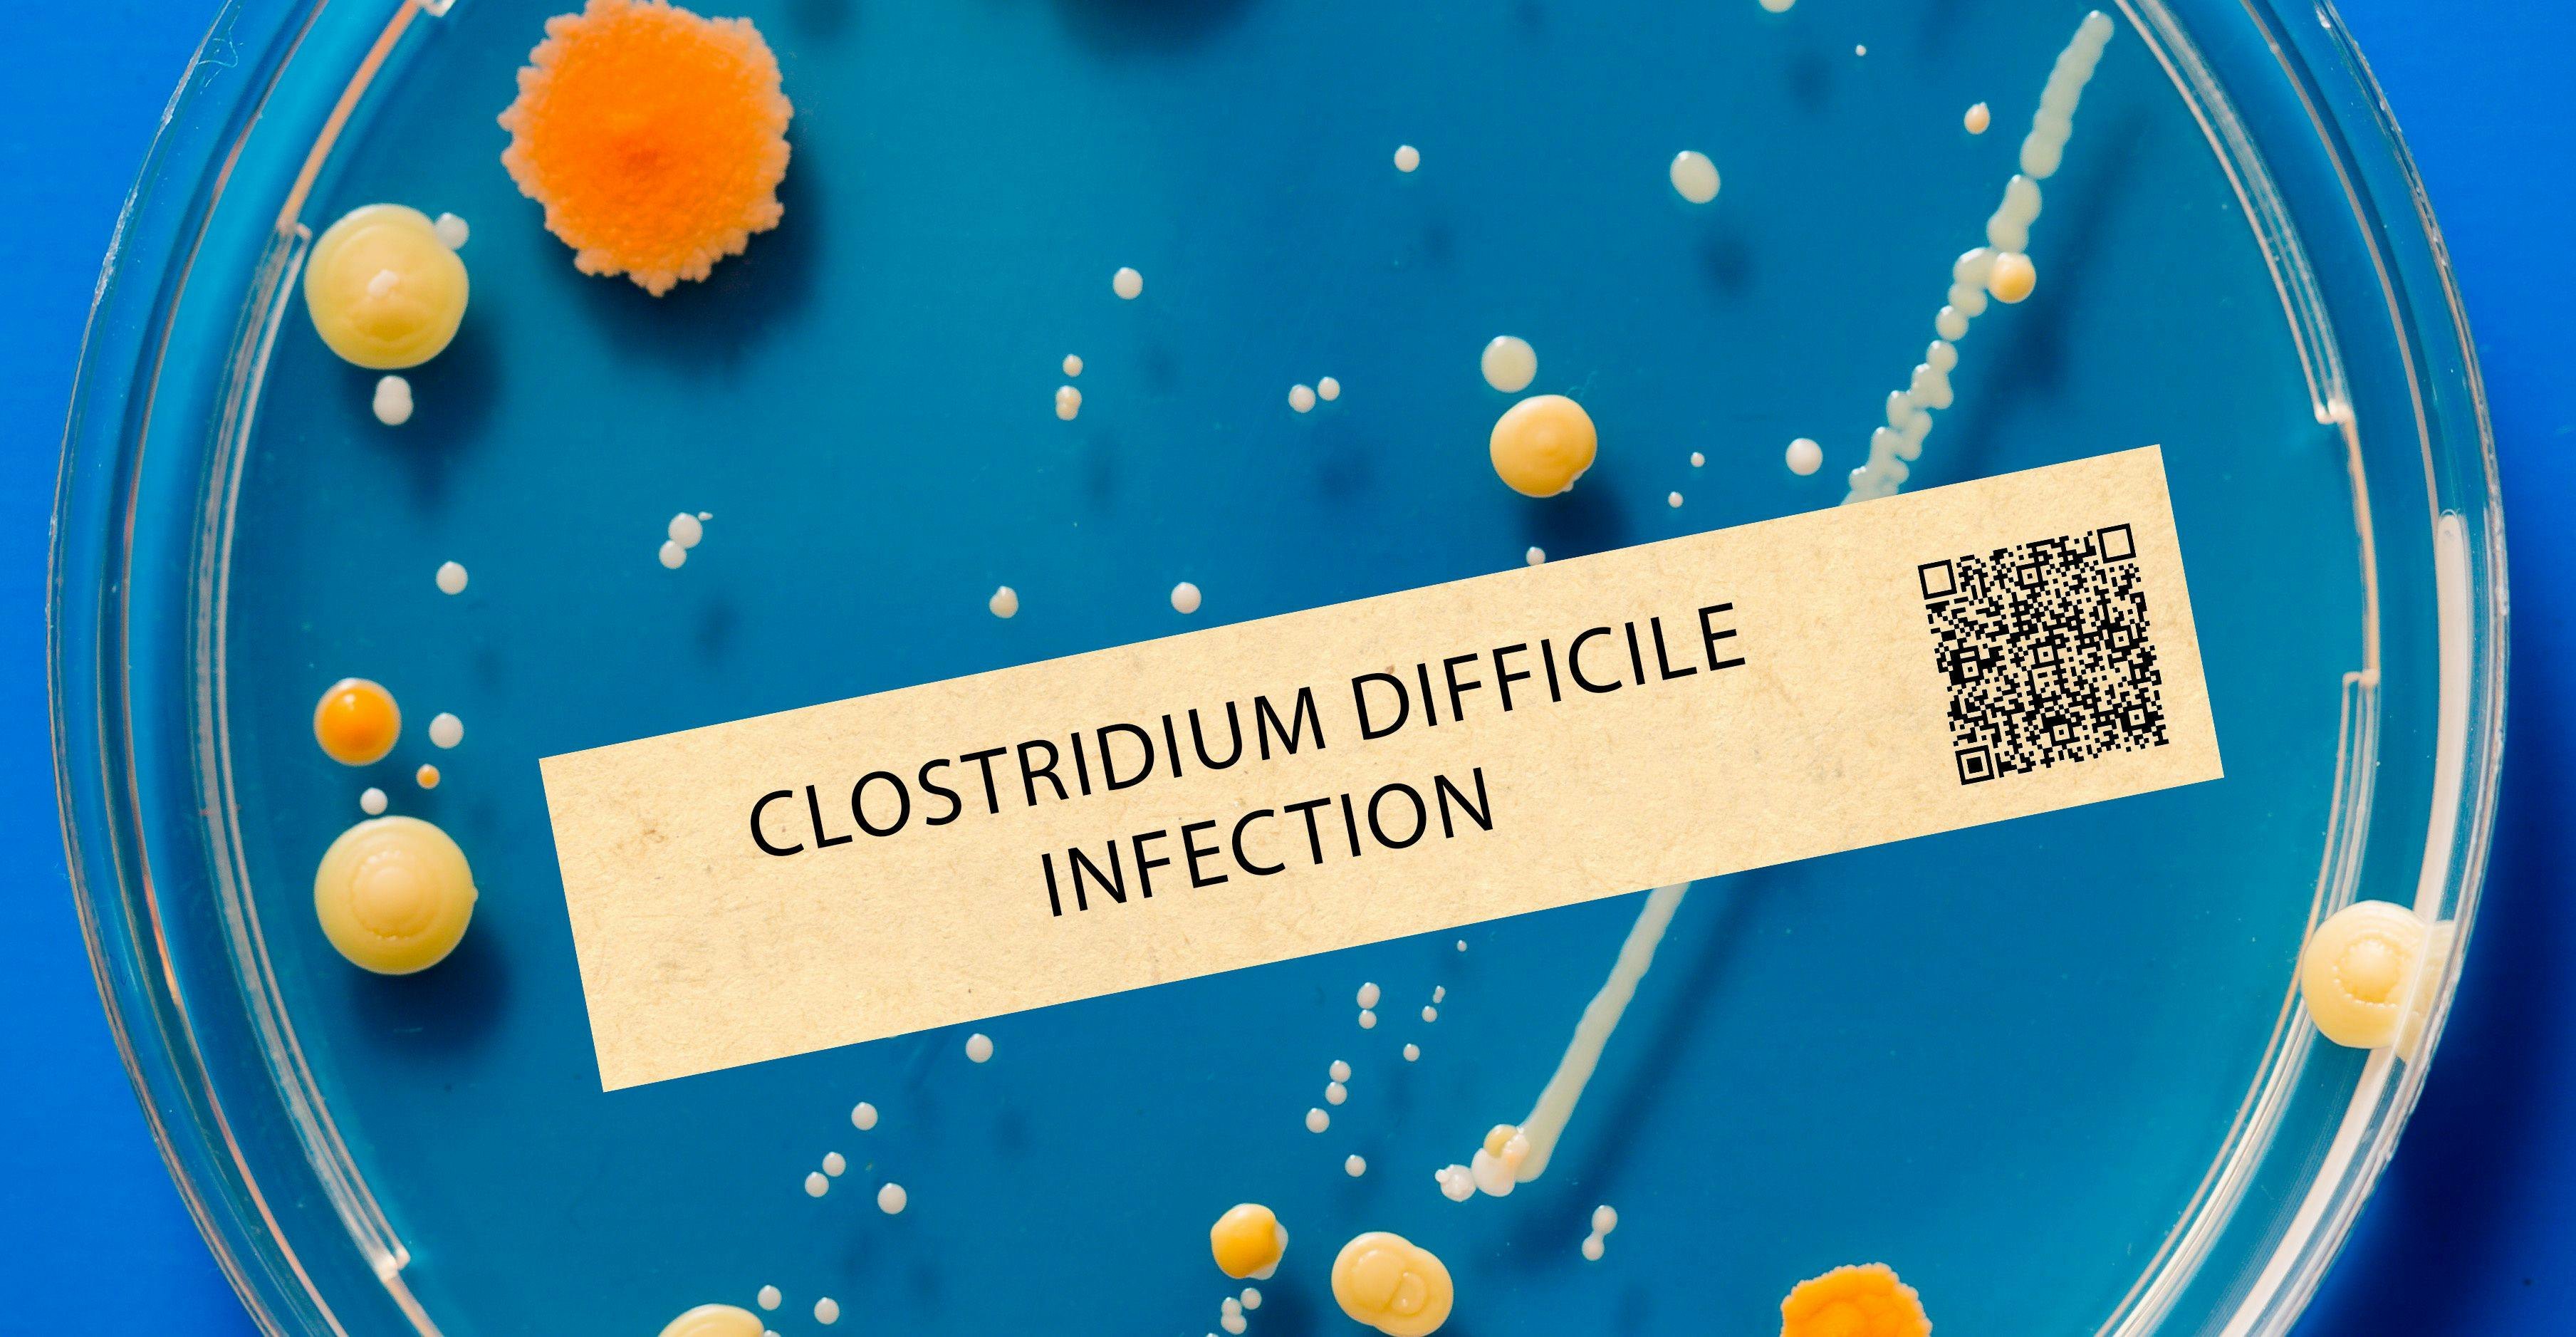 Clostridium difficile infection - Bacterial infection that can cause severe diarrhea and inflammation of the colon. | Image Credit: luchschenF - stock.adobe.com